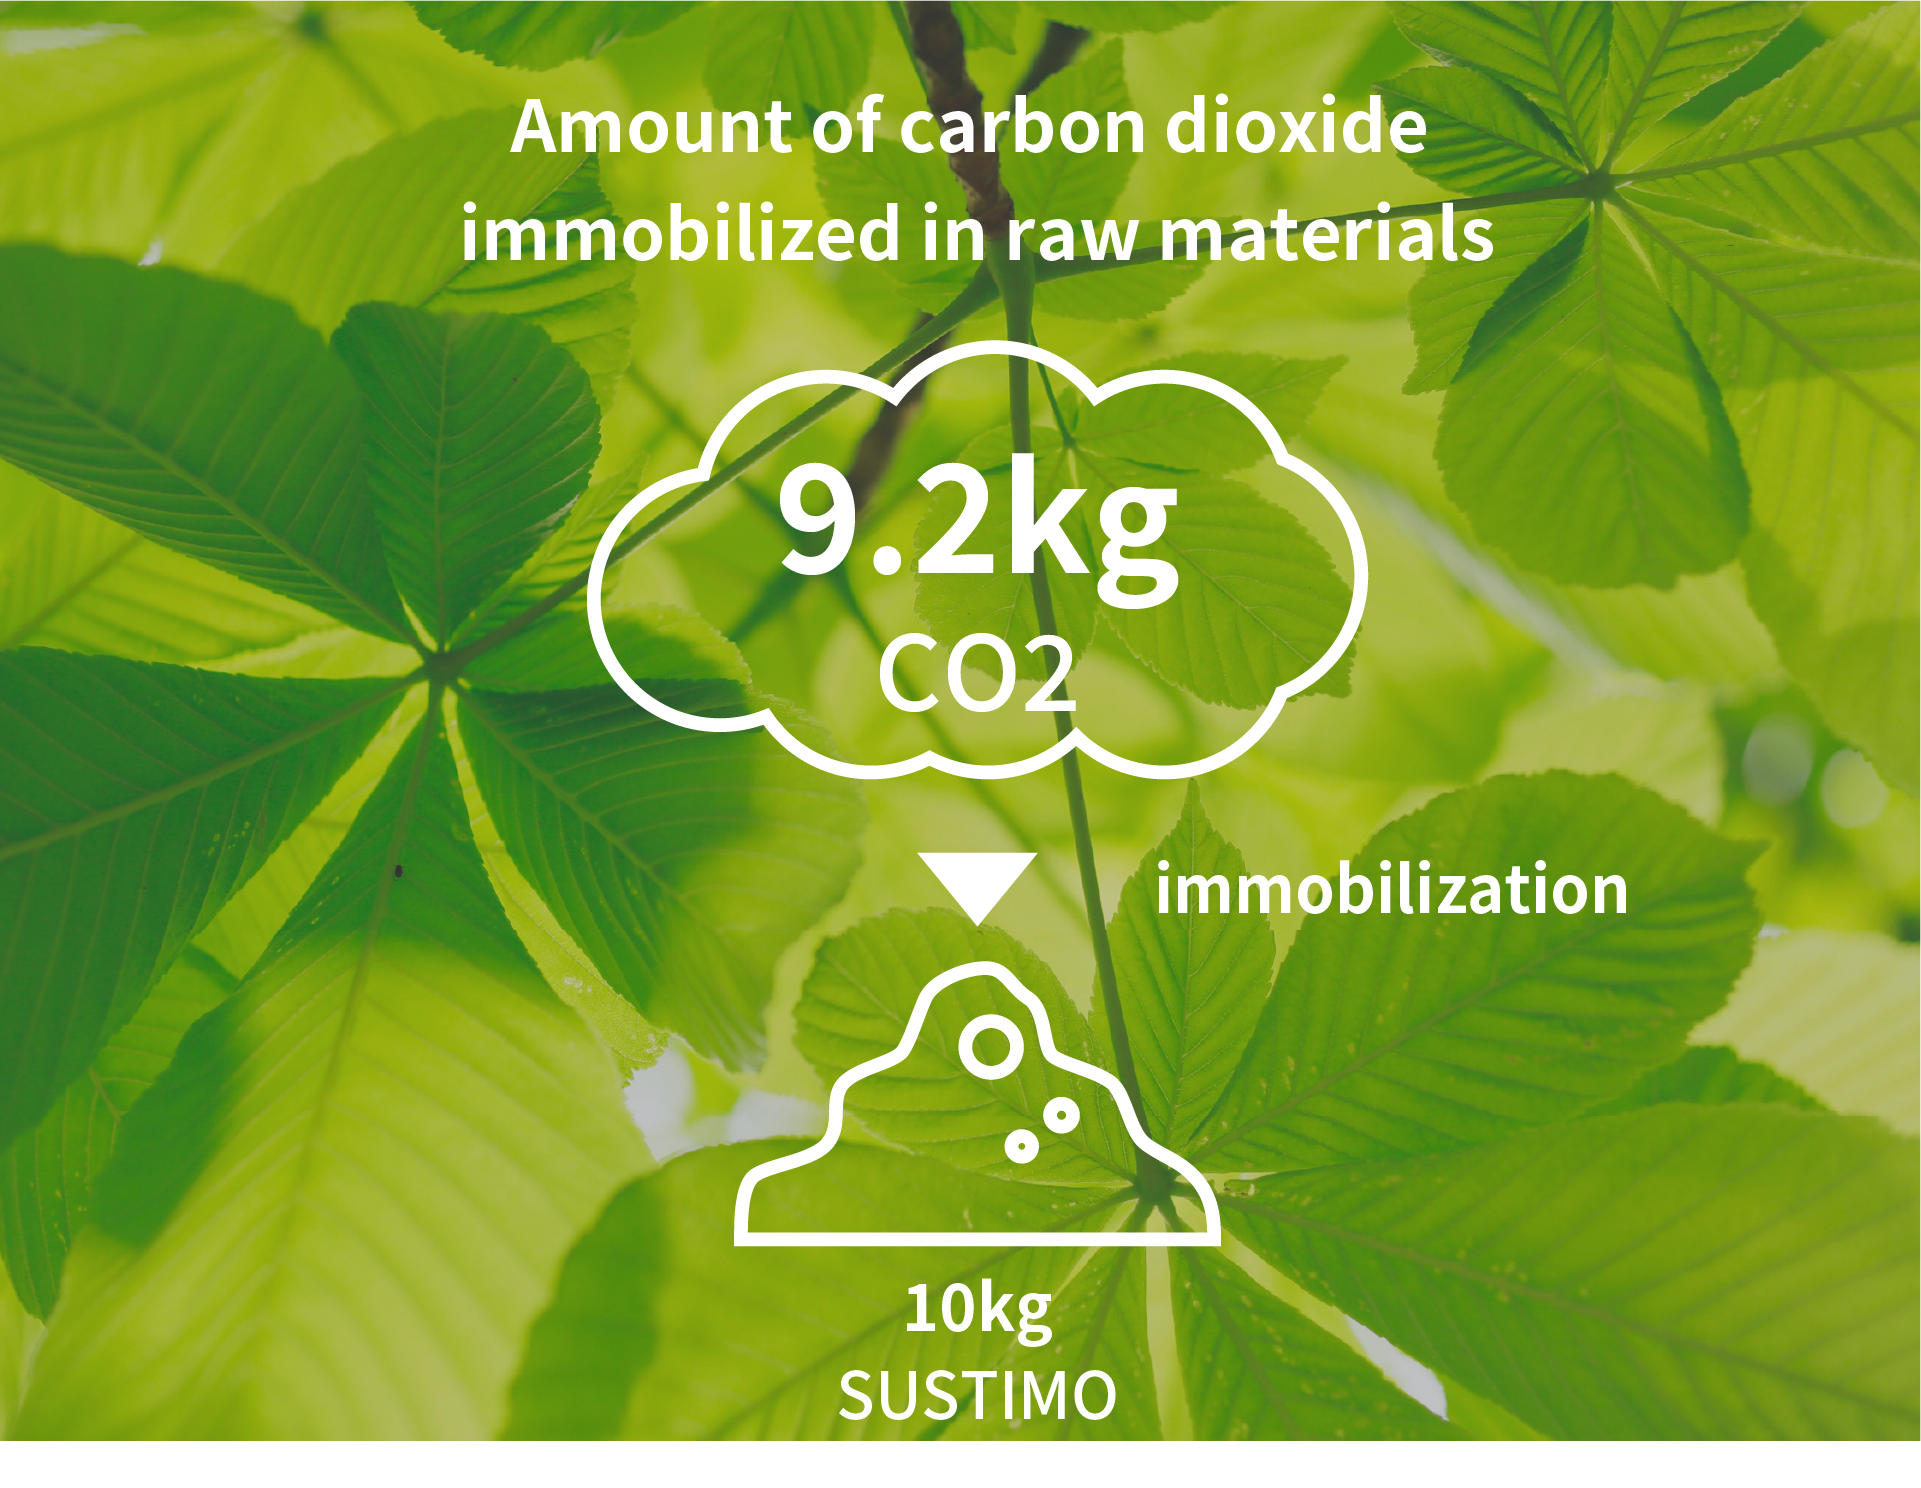 ・The amount of carbon dioxide absorbed in the raw material